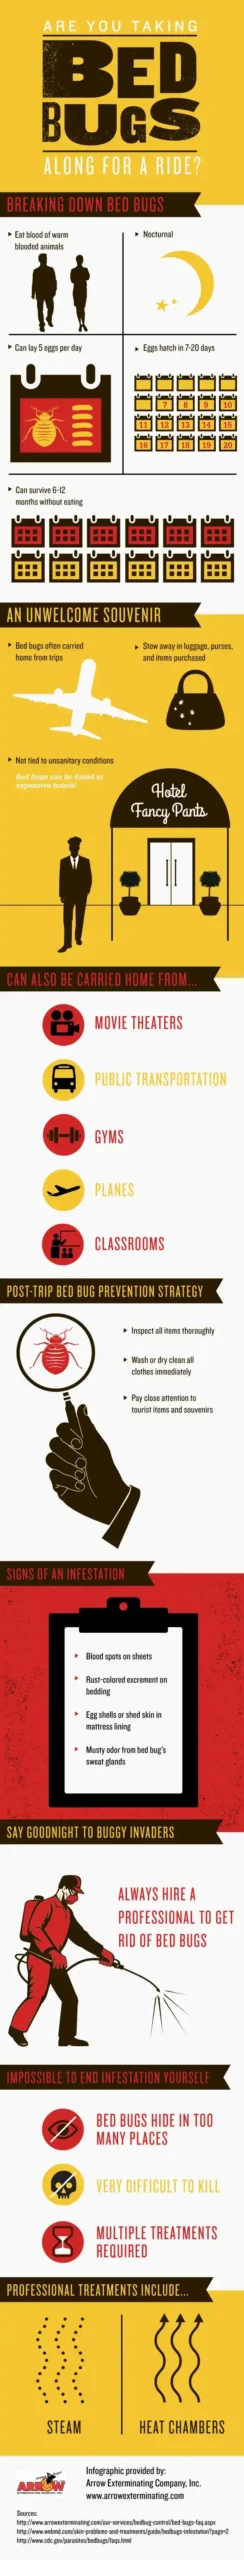 Bed bug infographic - keep pests away from your home with Arrow Exterminating Company in NY